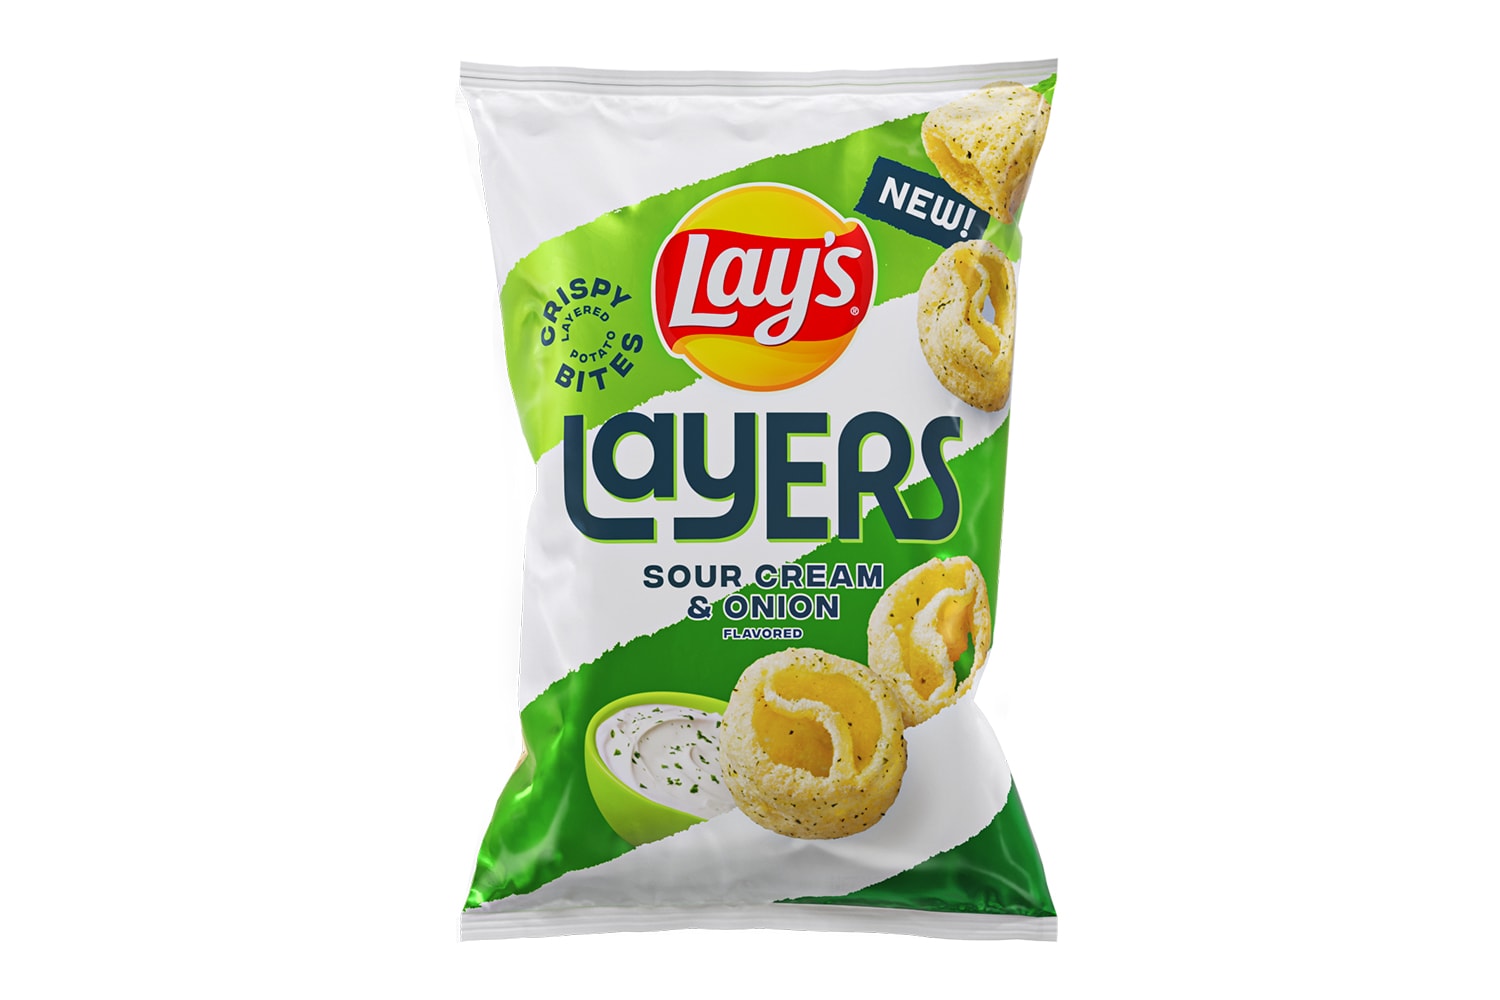 Lay’s Layers Launch Three Cheese Sour Cream & Onion Taste Review